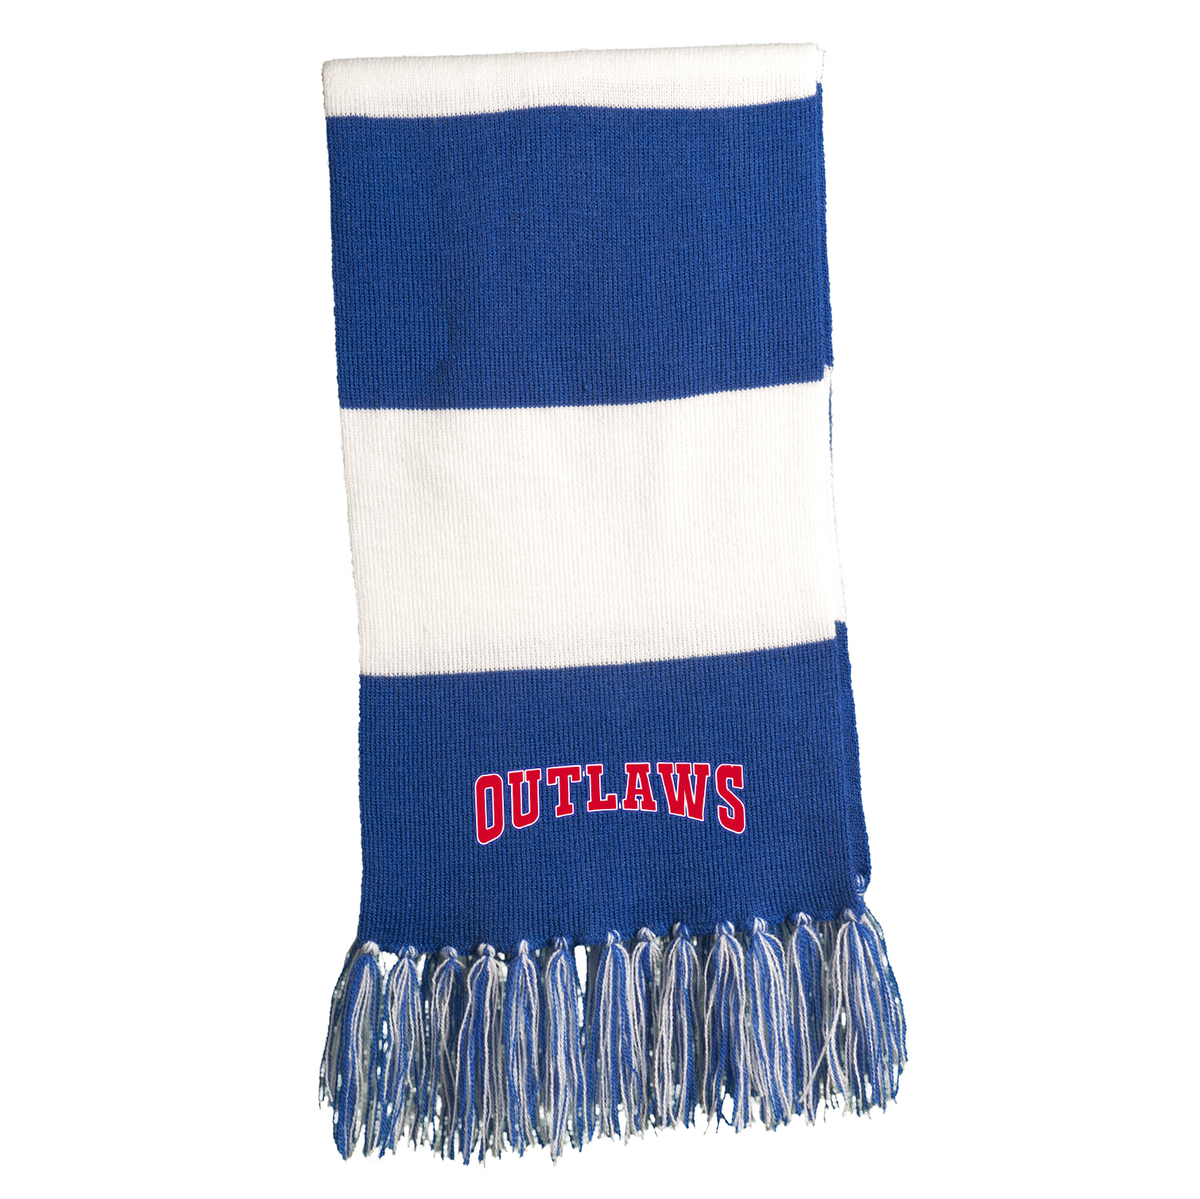 Southern Indiana Outlaws Baseball Team Scarf